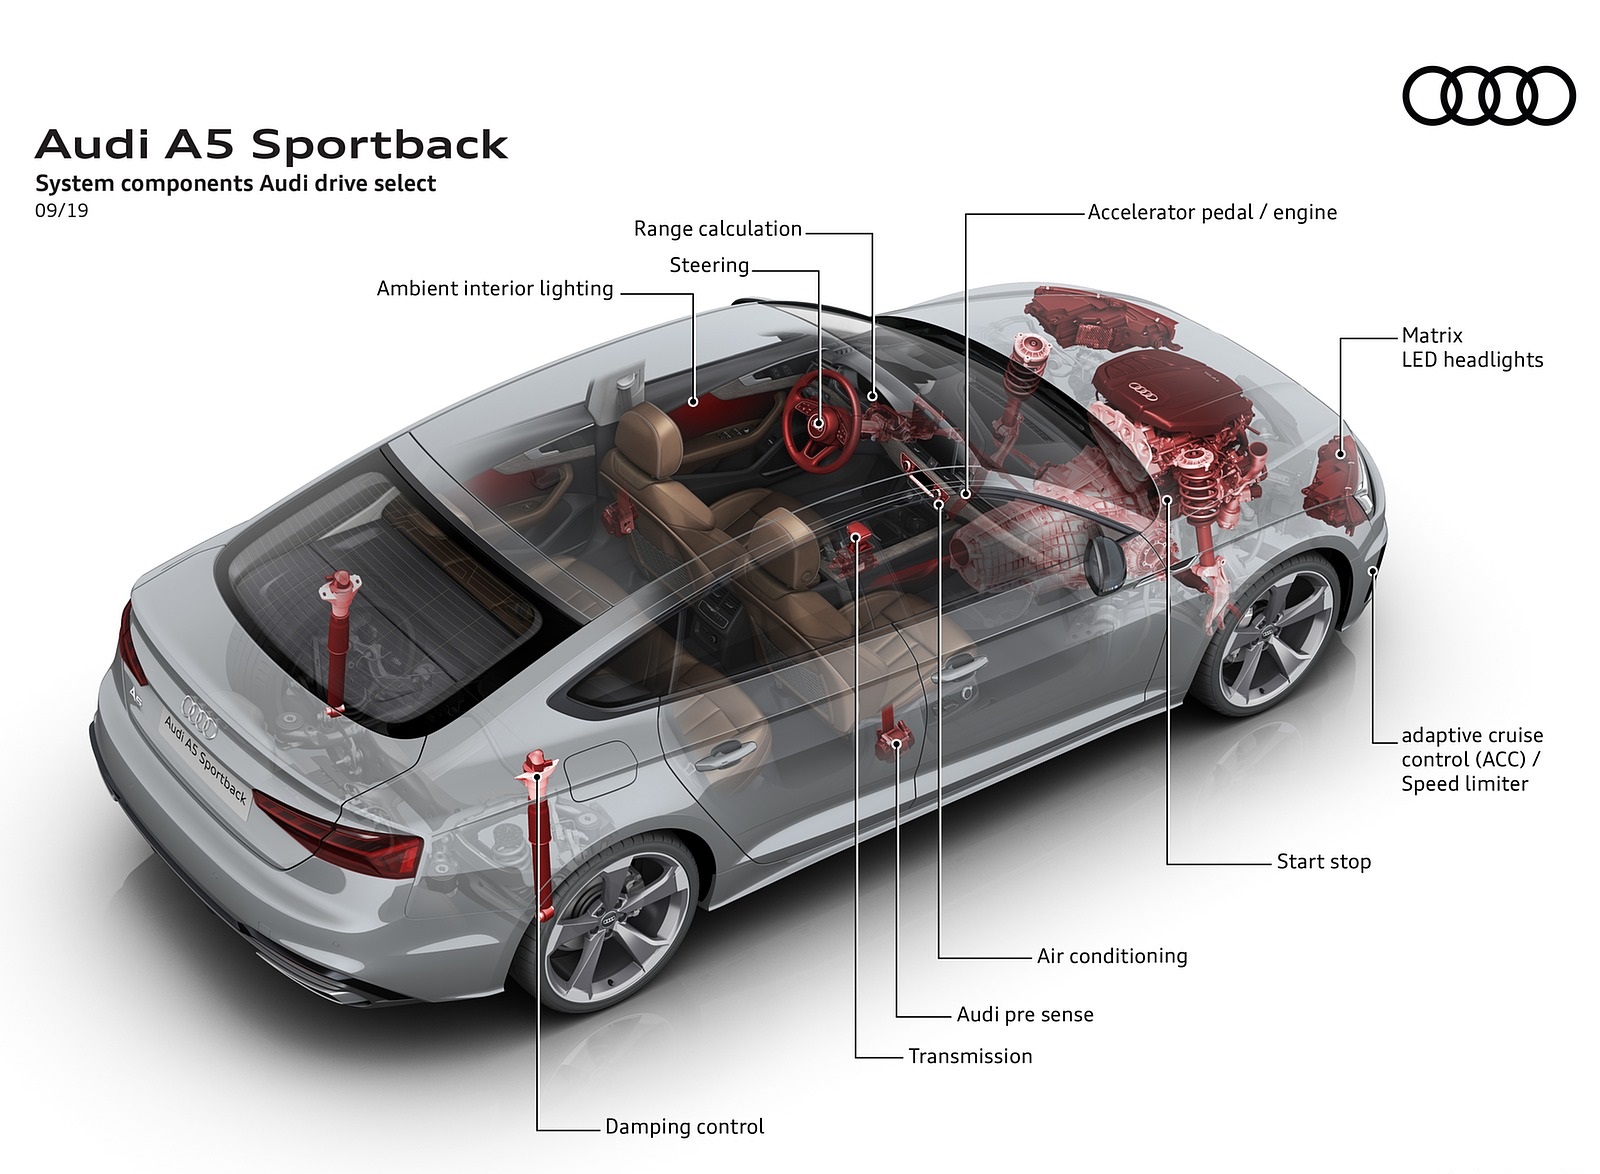 2020 Audi A5 Sportback System components Audi drive select Wallpapers #17 of 31